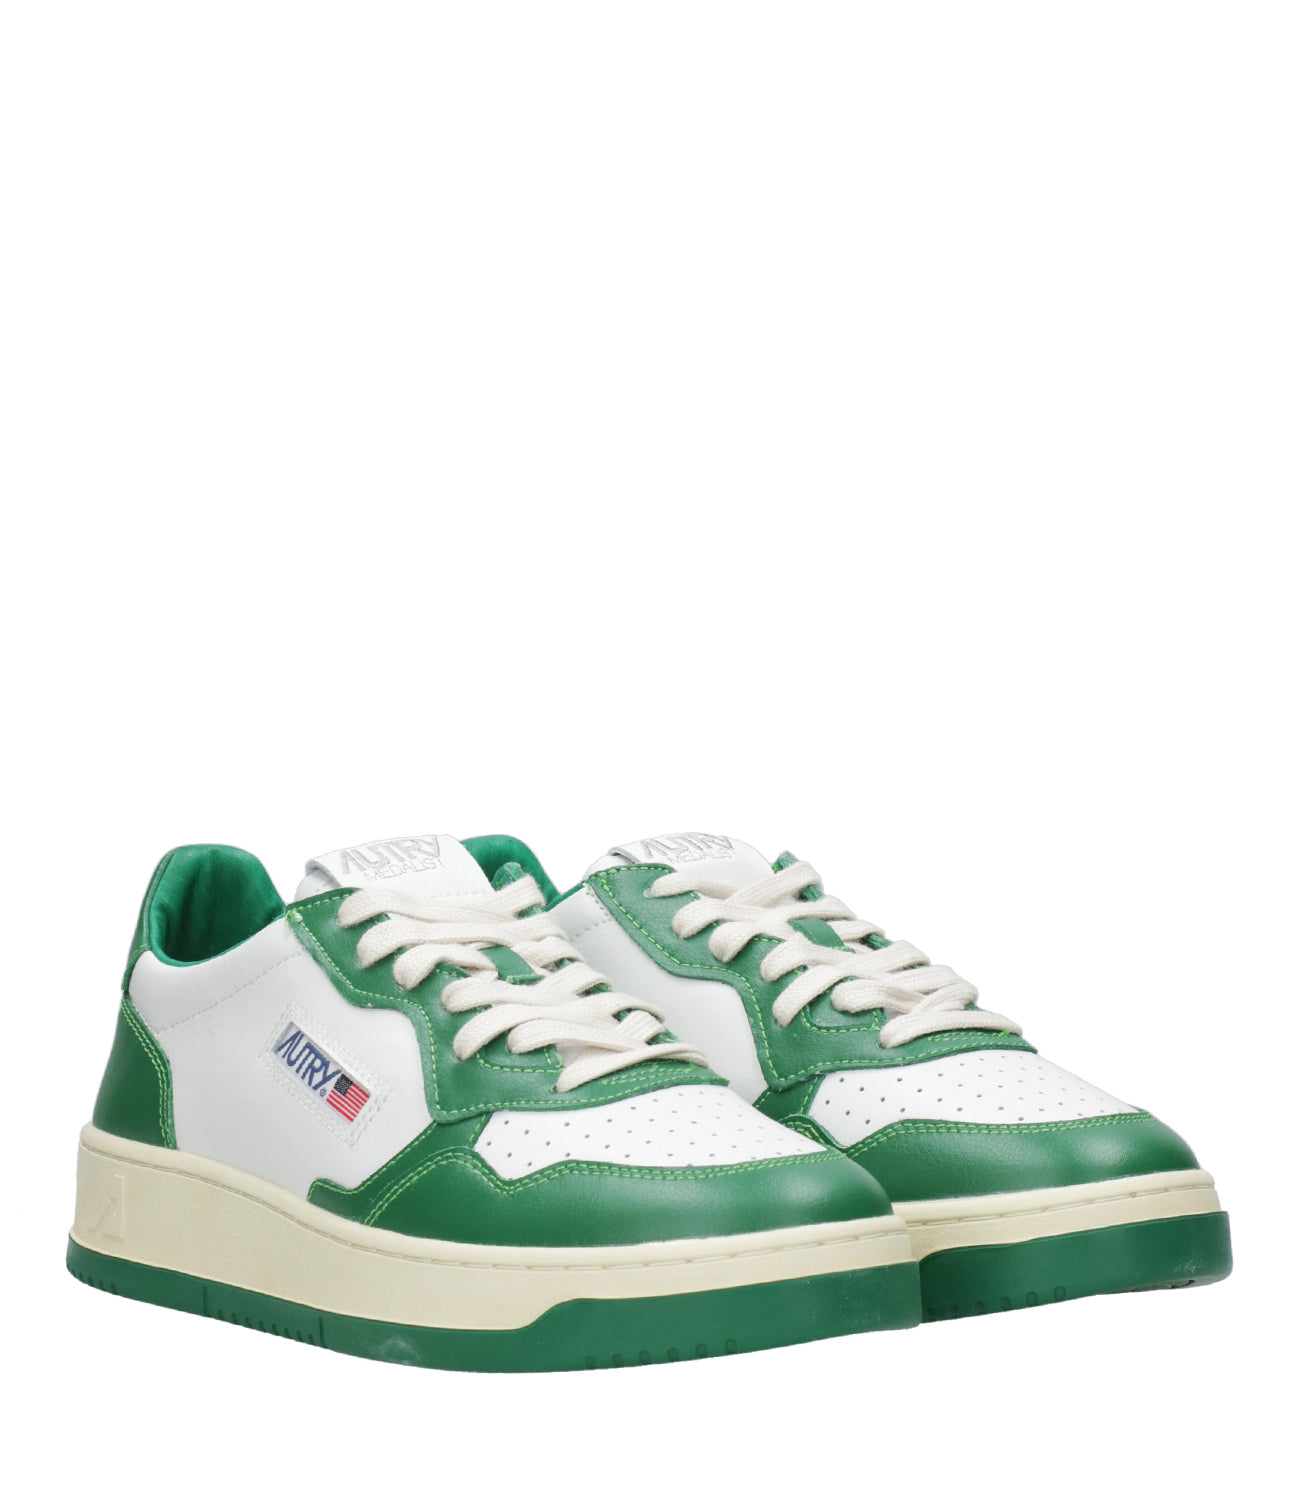 Autry | Medalist Low Sneakers White and Green